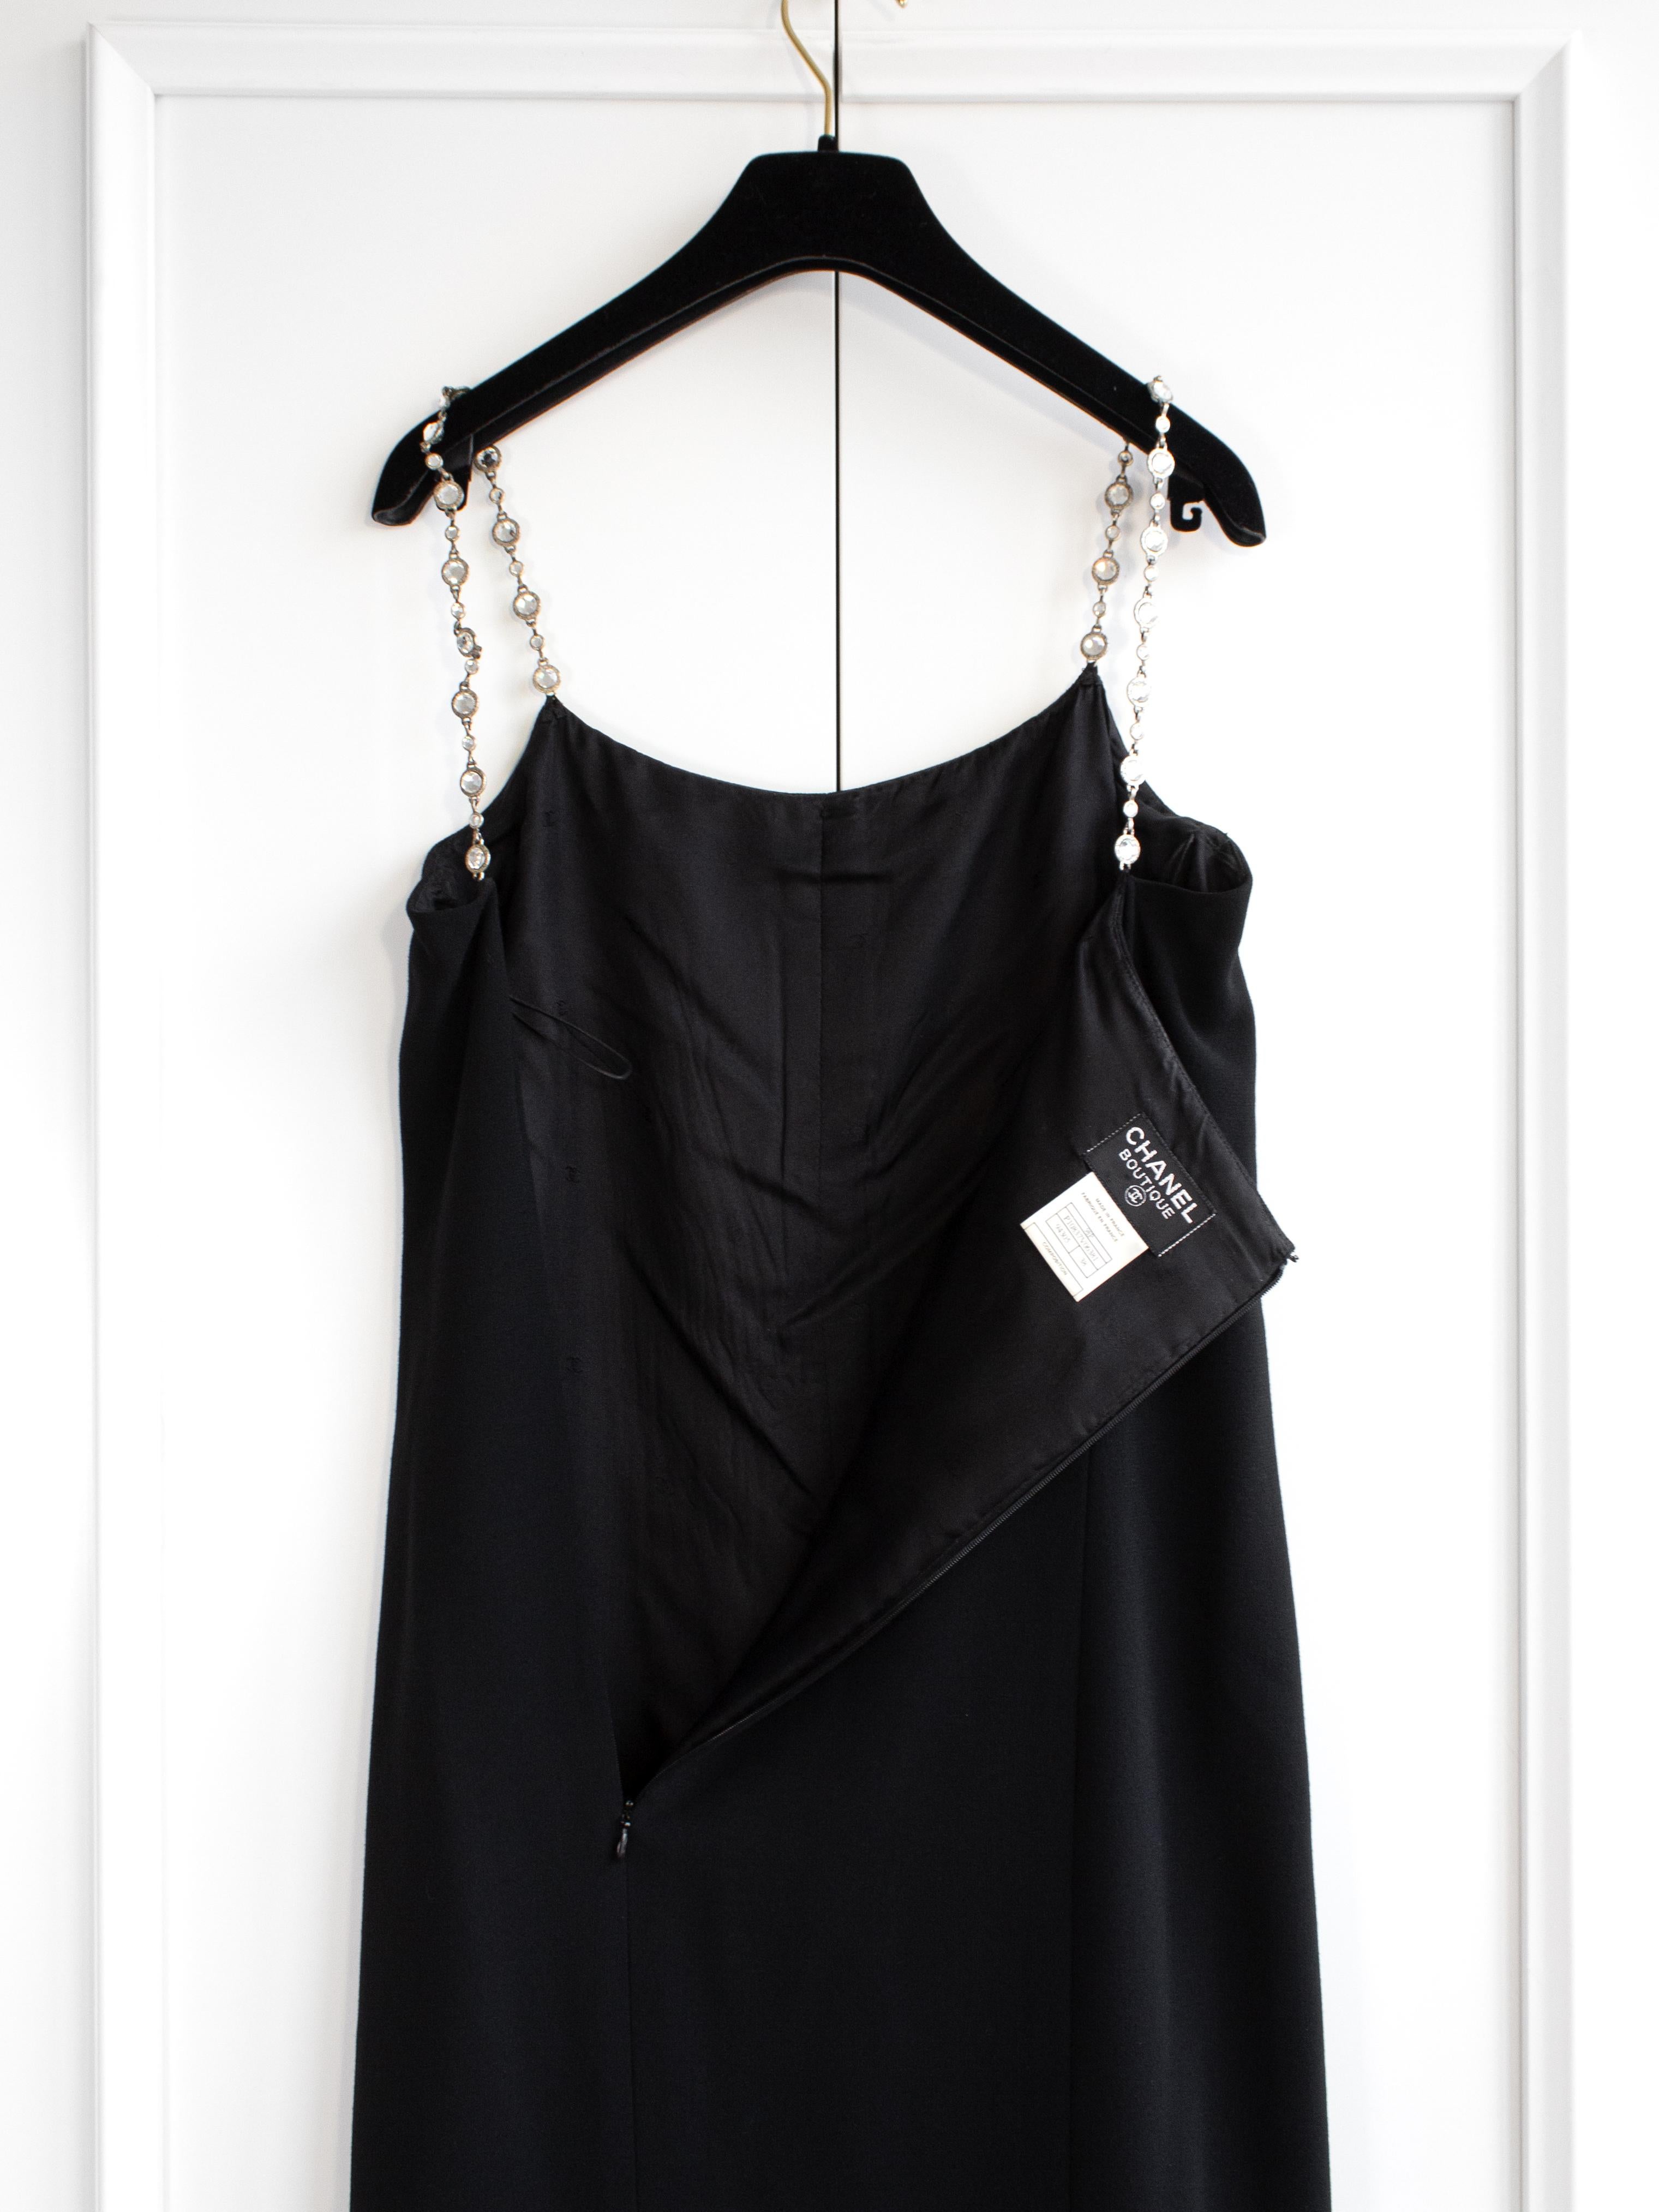 Chanel Vintage S/S 1998 Silver Crystal Chiclet Straps Black 98p Gown Dress For Sale 9